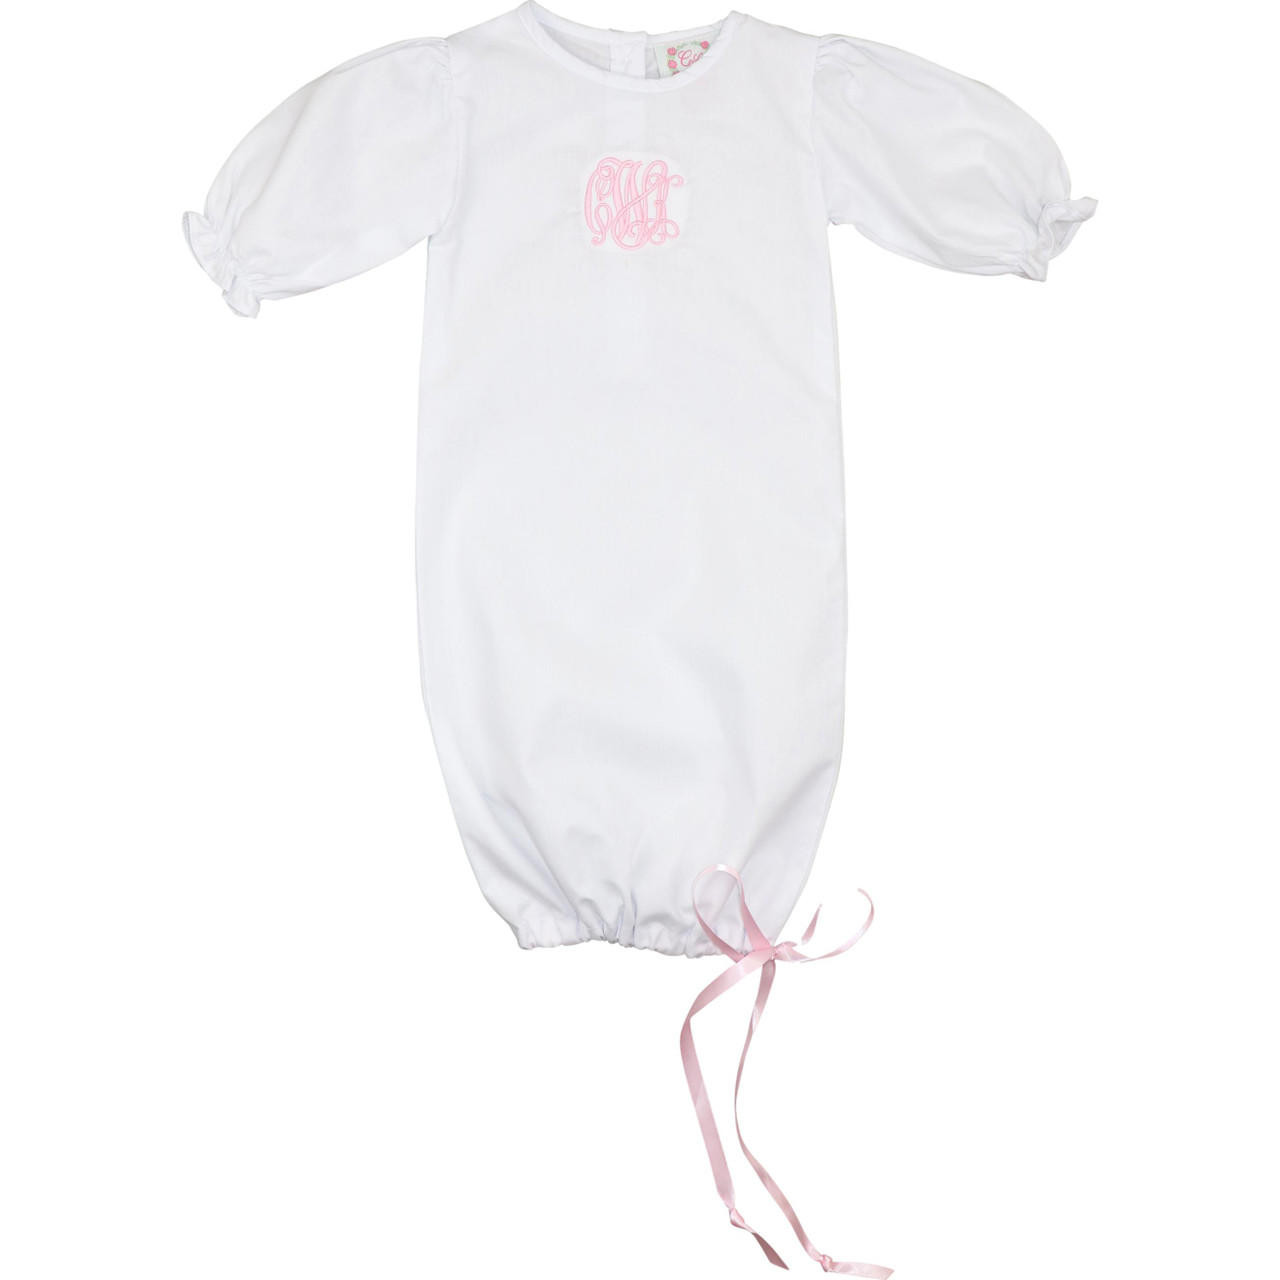 Blank Layette Gowns - Plain Baby Dresses